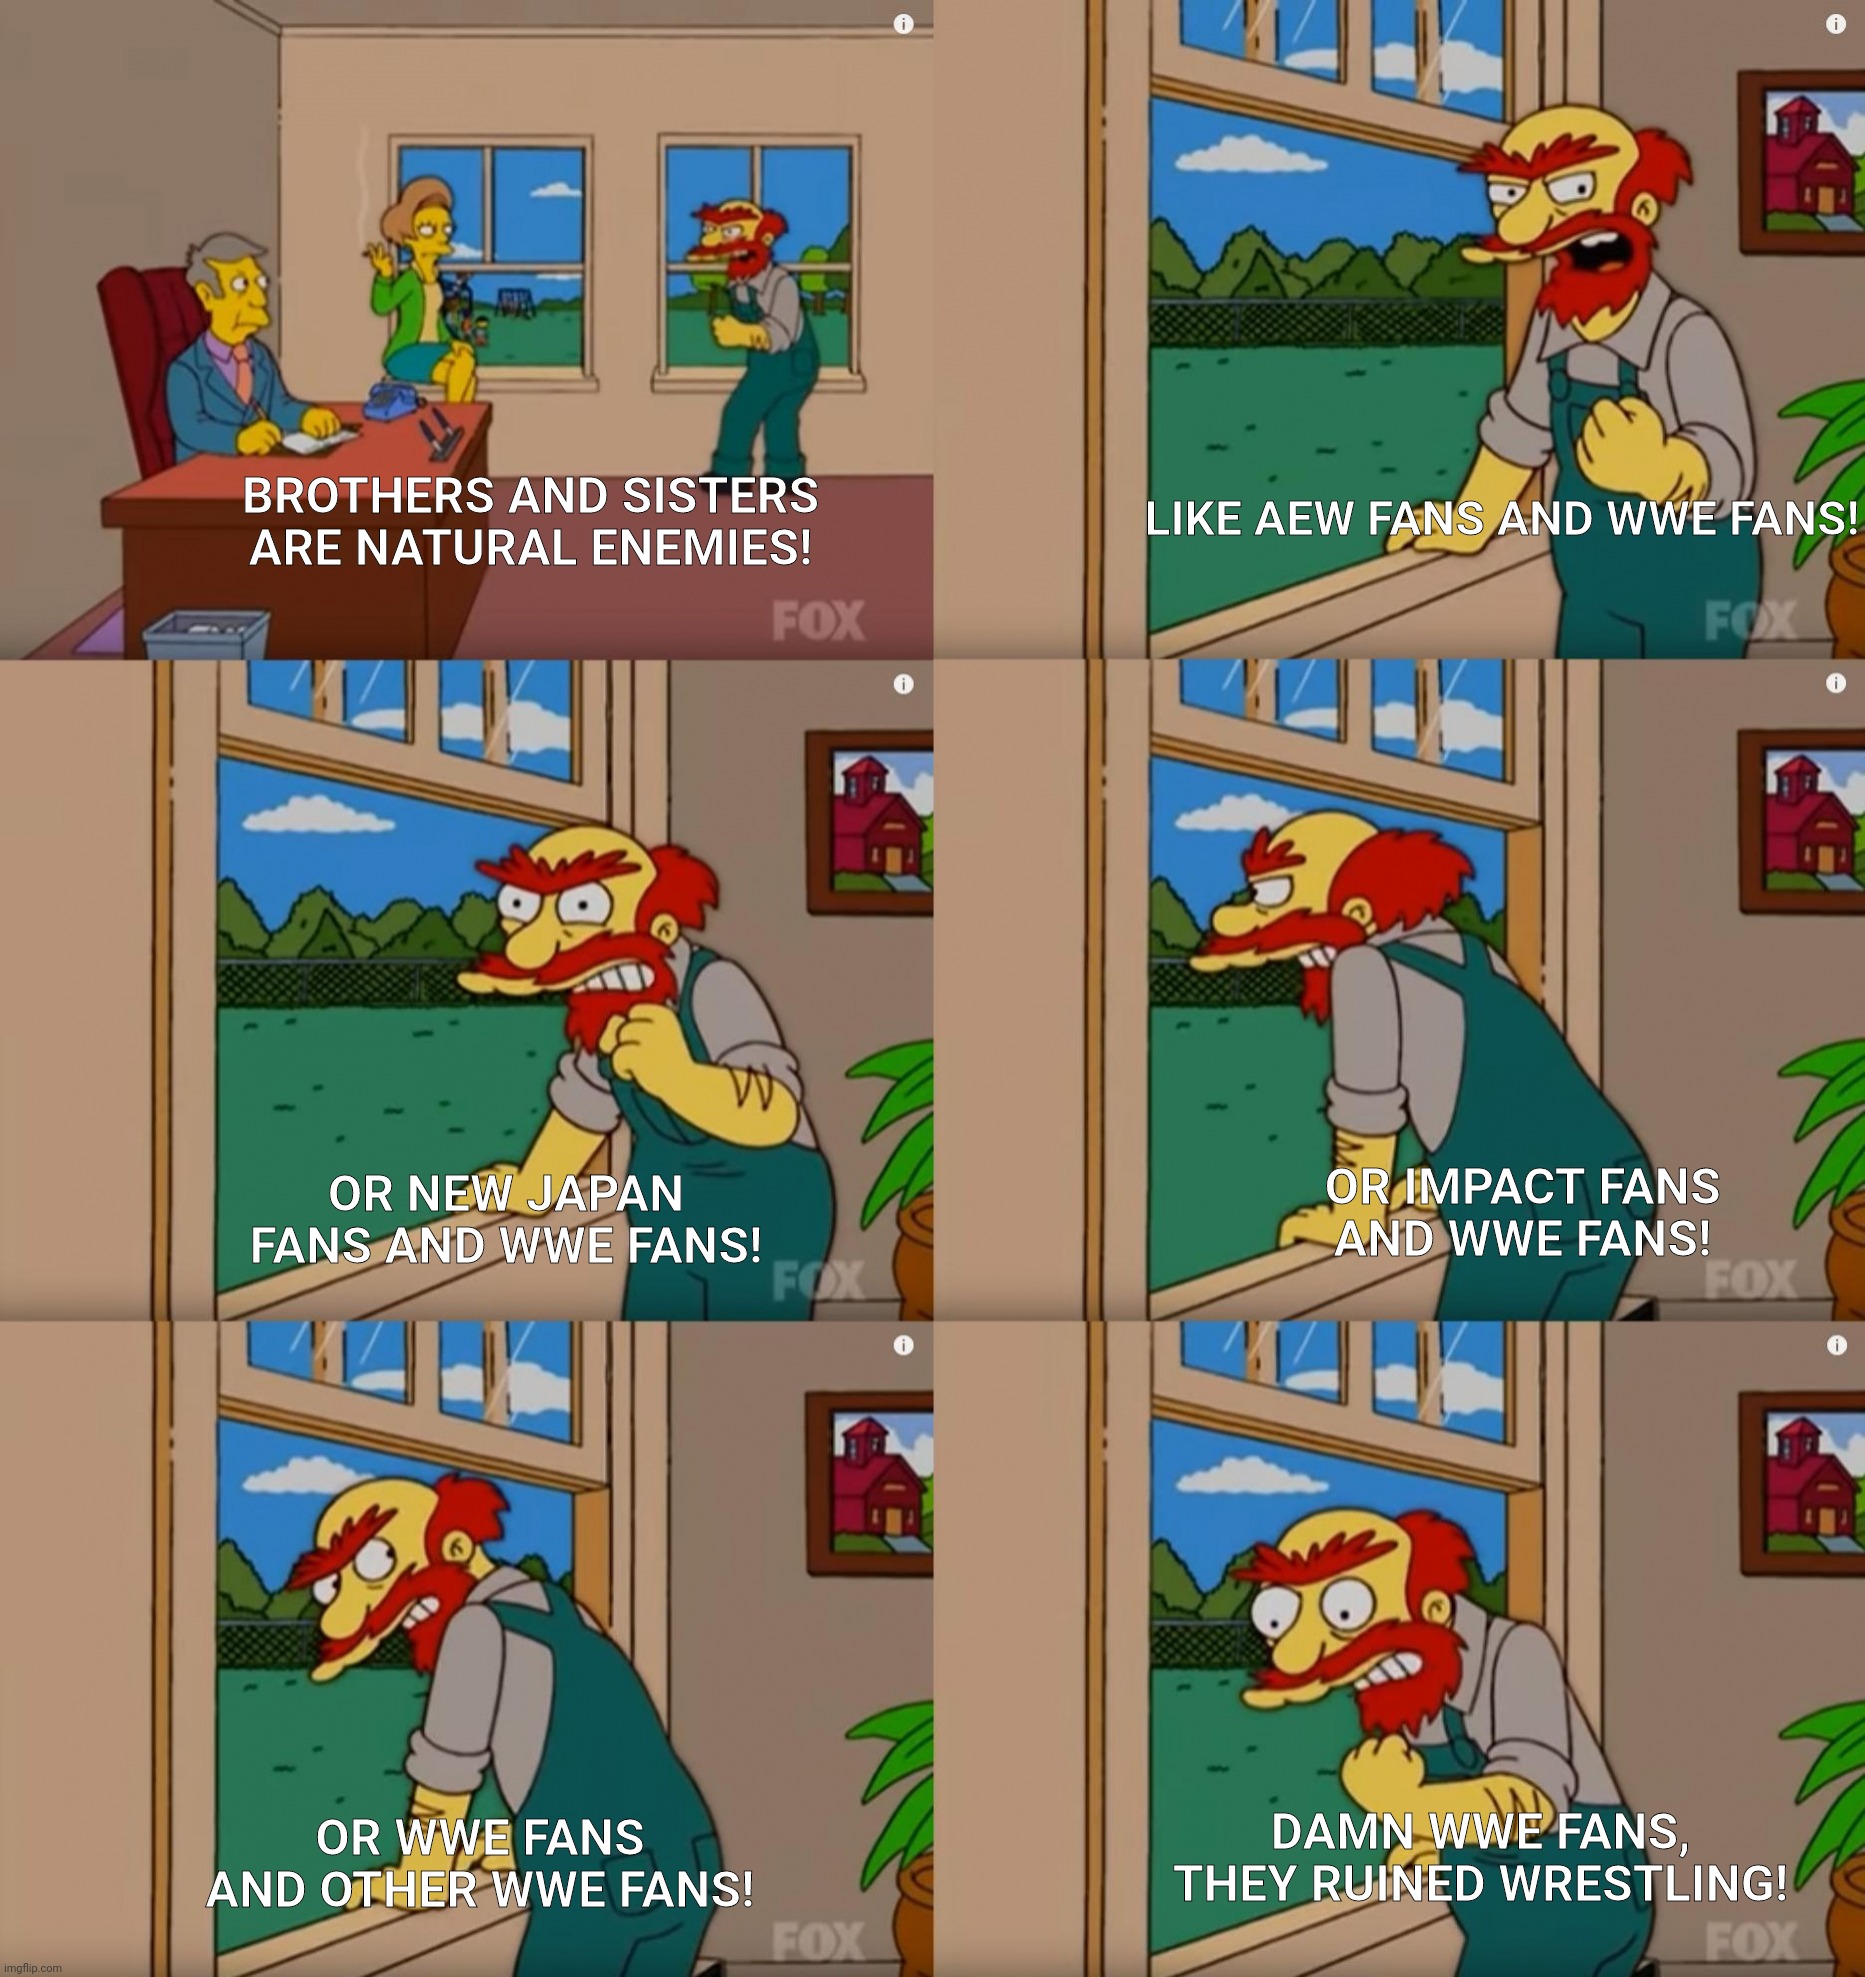 Groundskeeper Willie Natural Enemies | LIKE AEW FANS AND WWE FANS! BROTHERS AND SISTERS ARE NATURAL ENEMIES! OR NEW JAPAN FANS AND WWE FANS! OR IMPACT FANS AND WWE FANS! DAMN WWE FANS, THEY RUINED WRESTLING! OR WWE FANS AND OTHER WWE FANS! | image tagged in groundskeeper willie natural enemies | made w/ Imgflip meme maker